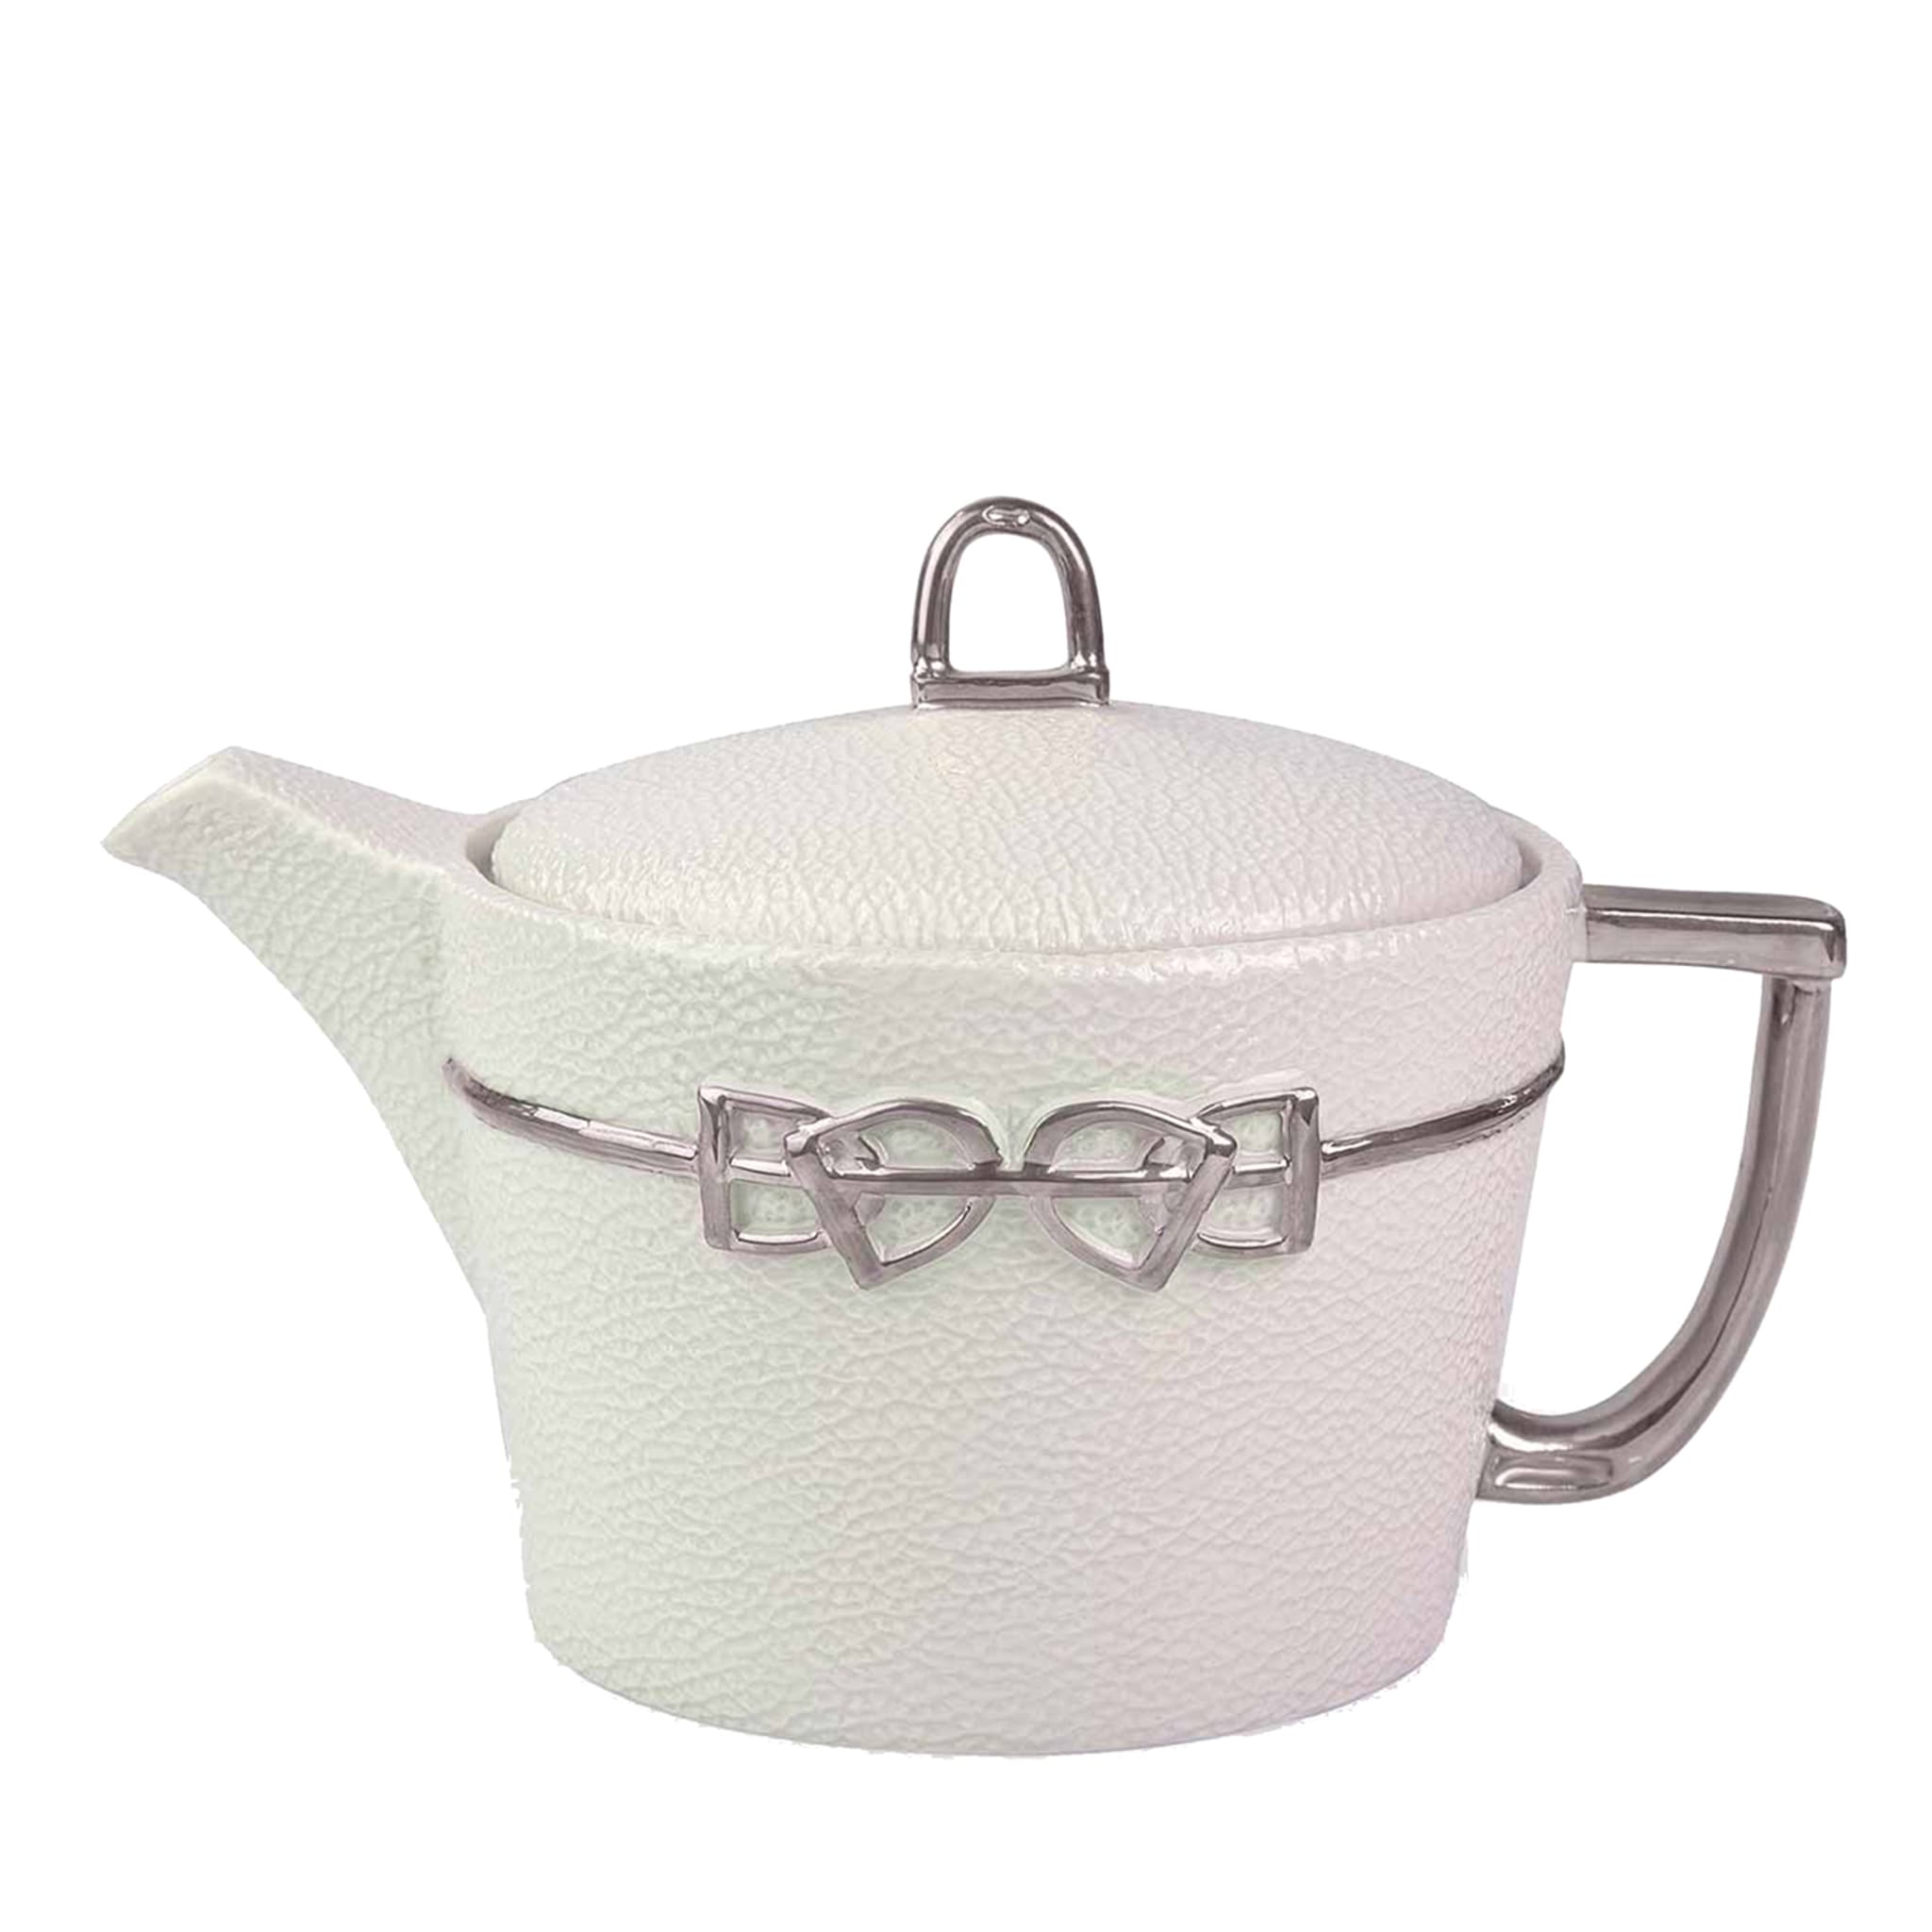 DRESSAGE TEA POT - WHITE AND SILVER - Main view